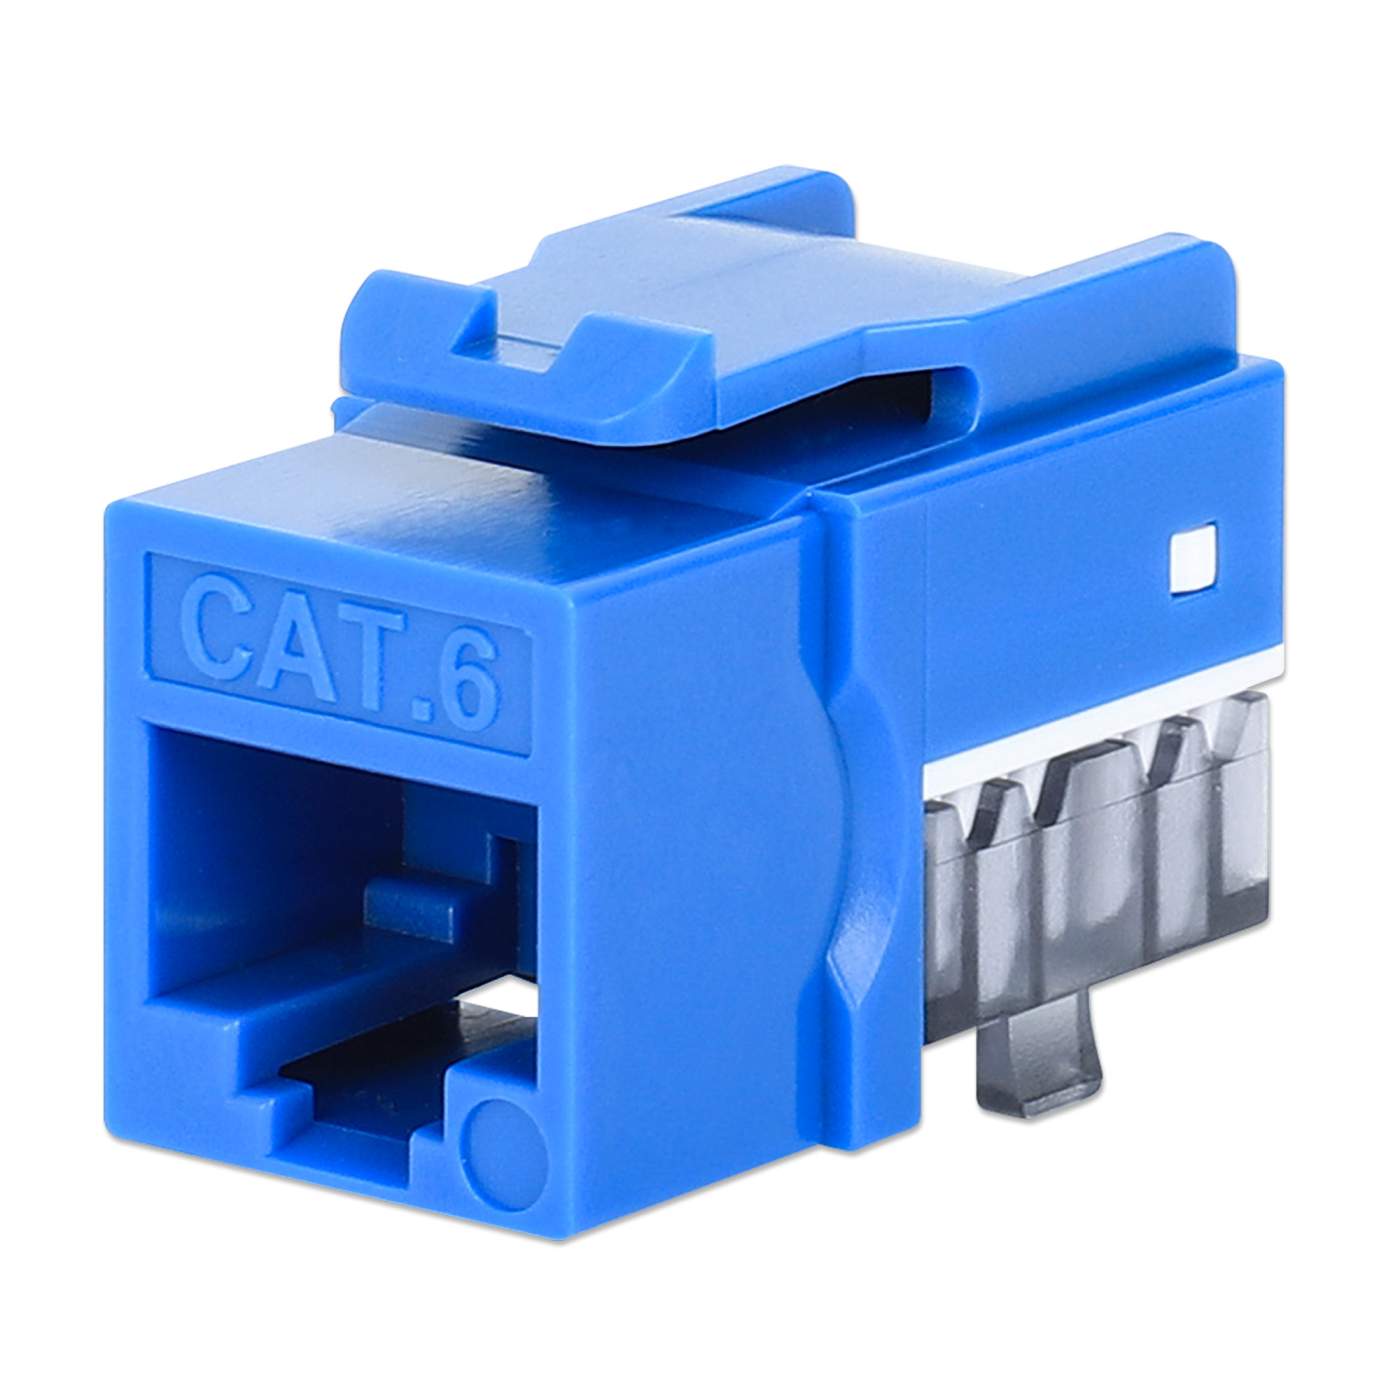 Cat6 Slim Keystone Jack with Punch-Down Stand, Blue, 25-Pack Image 1